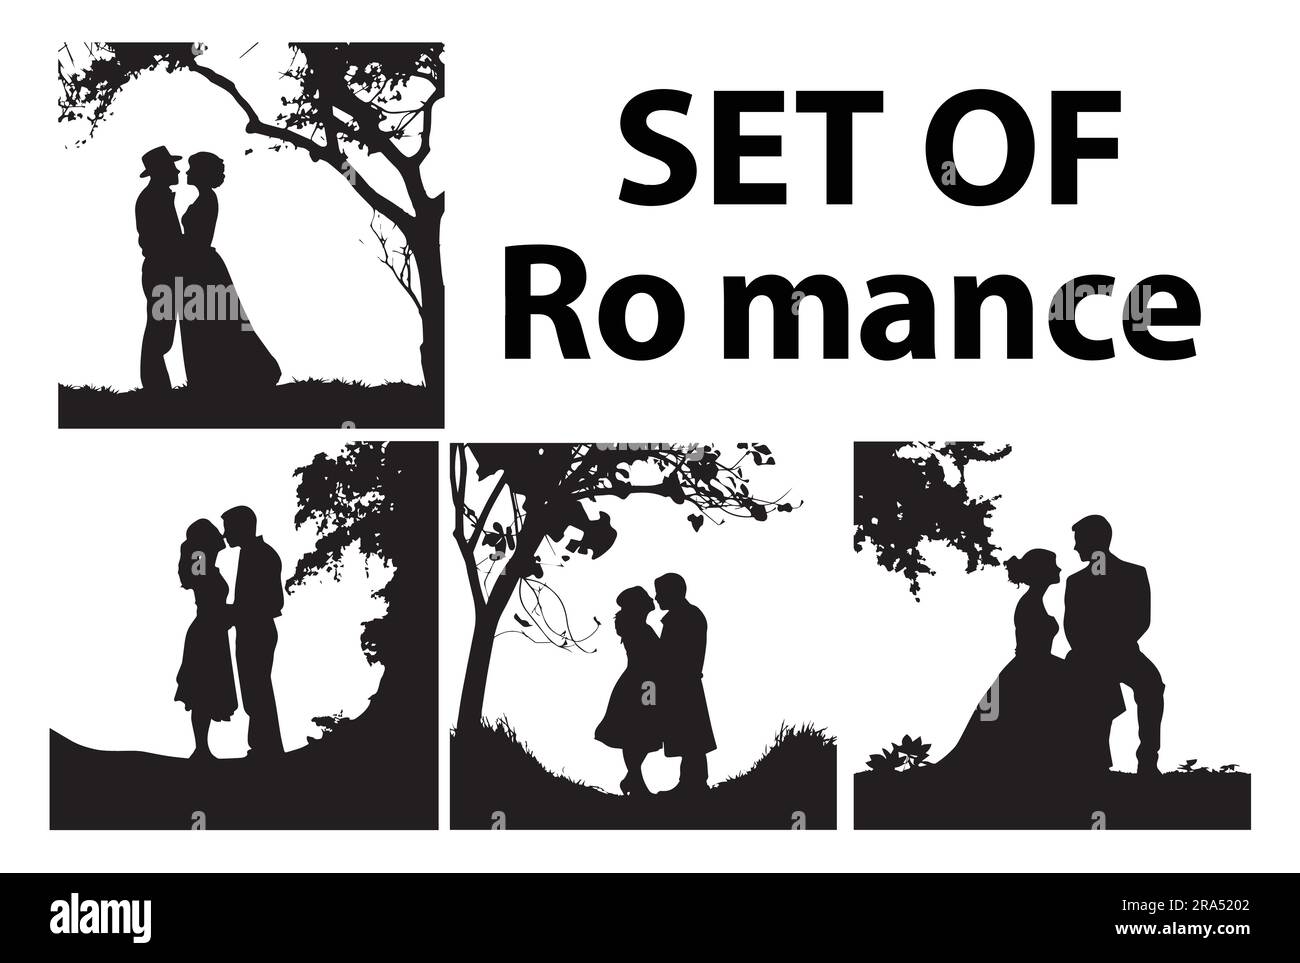 A set of Romance scenery silhouette vector illustration Stock Vector